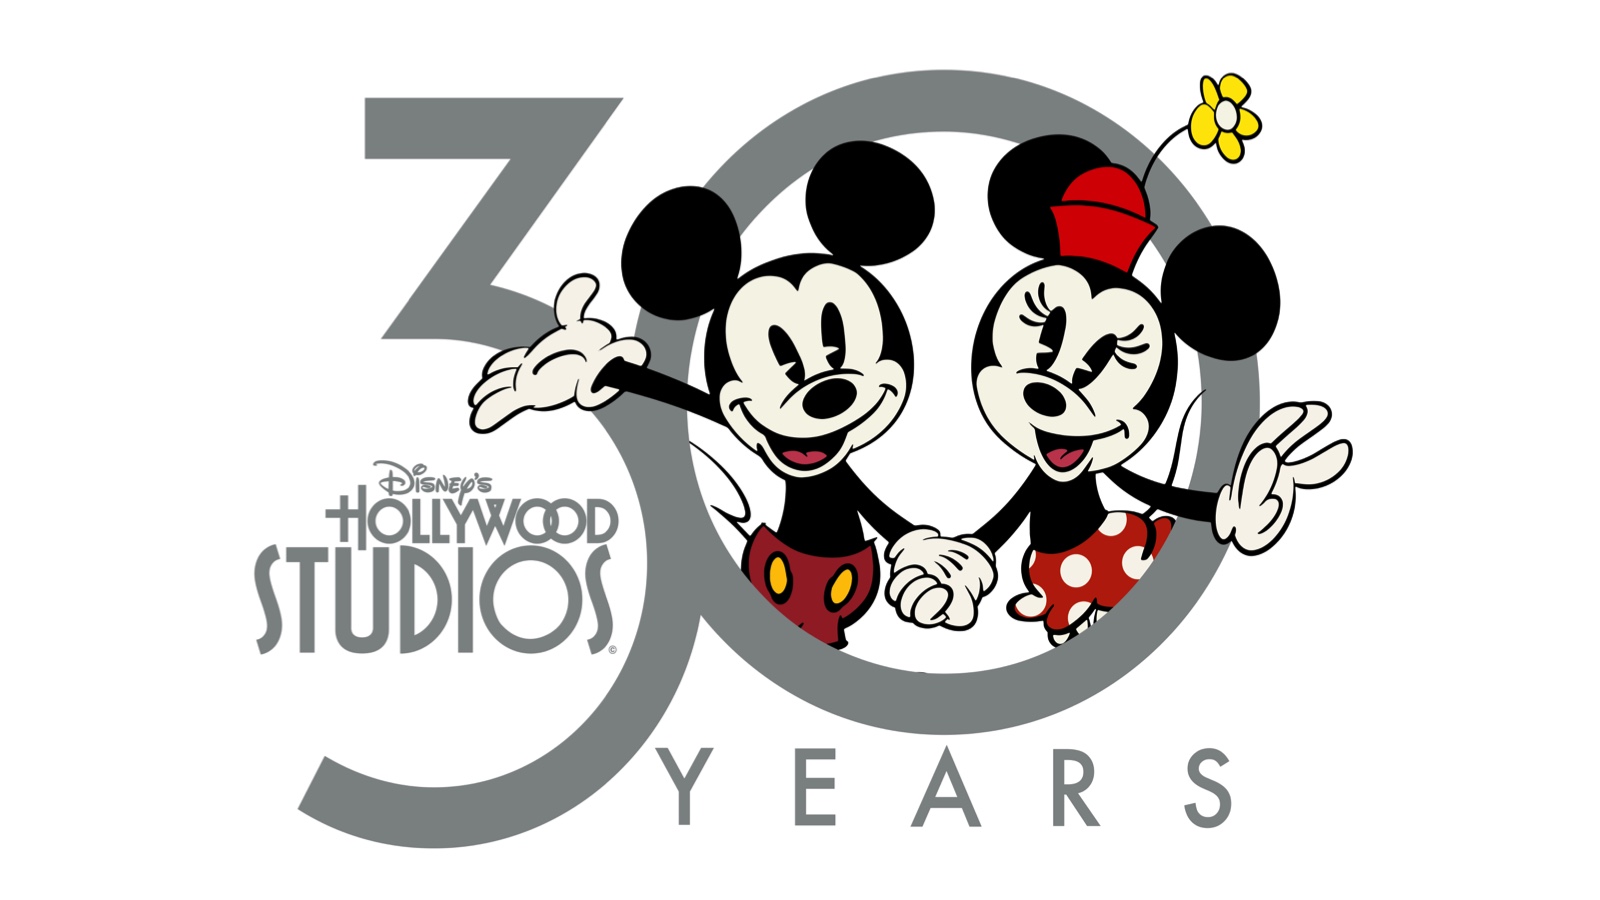 Celebrate the 30th Anniversary of Disney’s Hollywood Studios